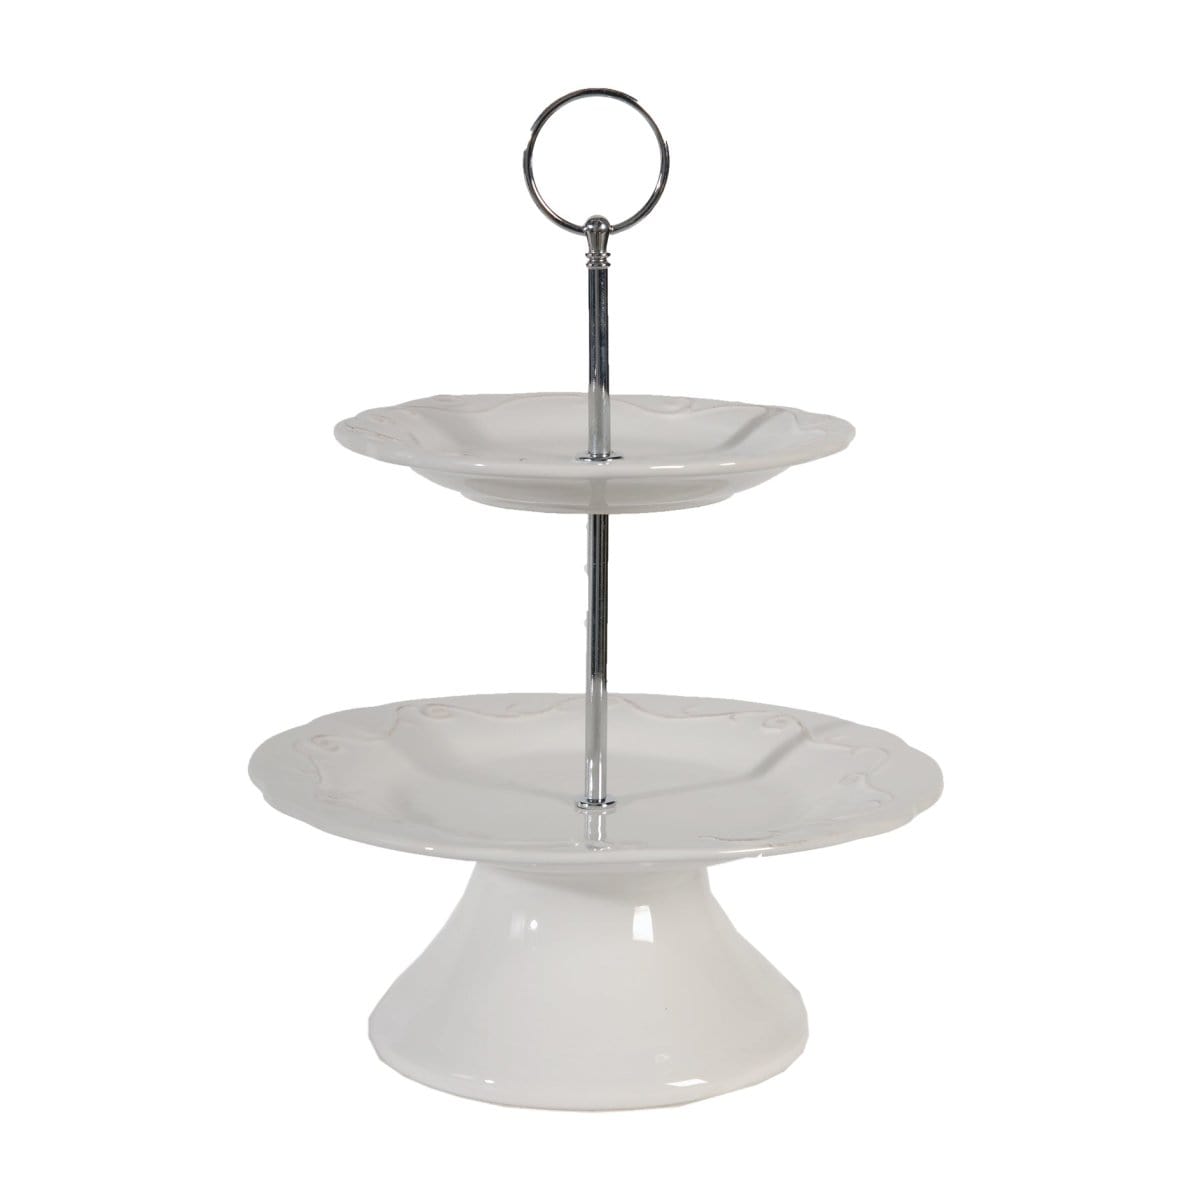 AB-69002  2-Tiered Candy Dish picket and rail